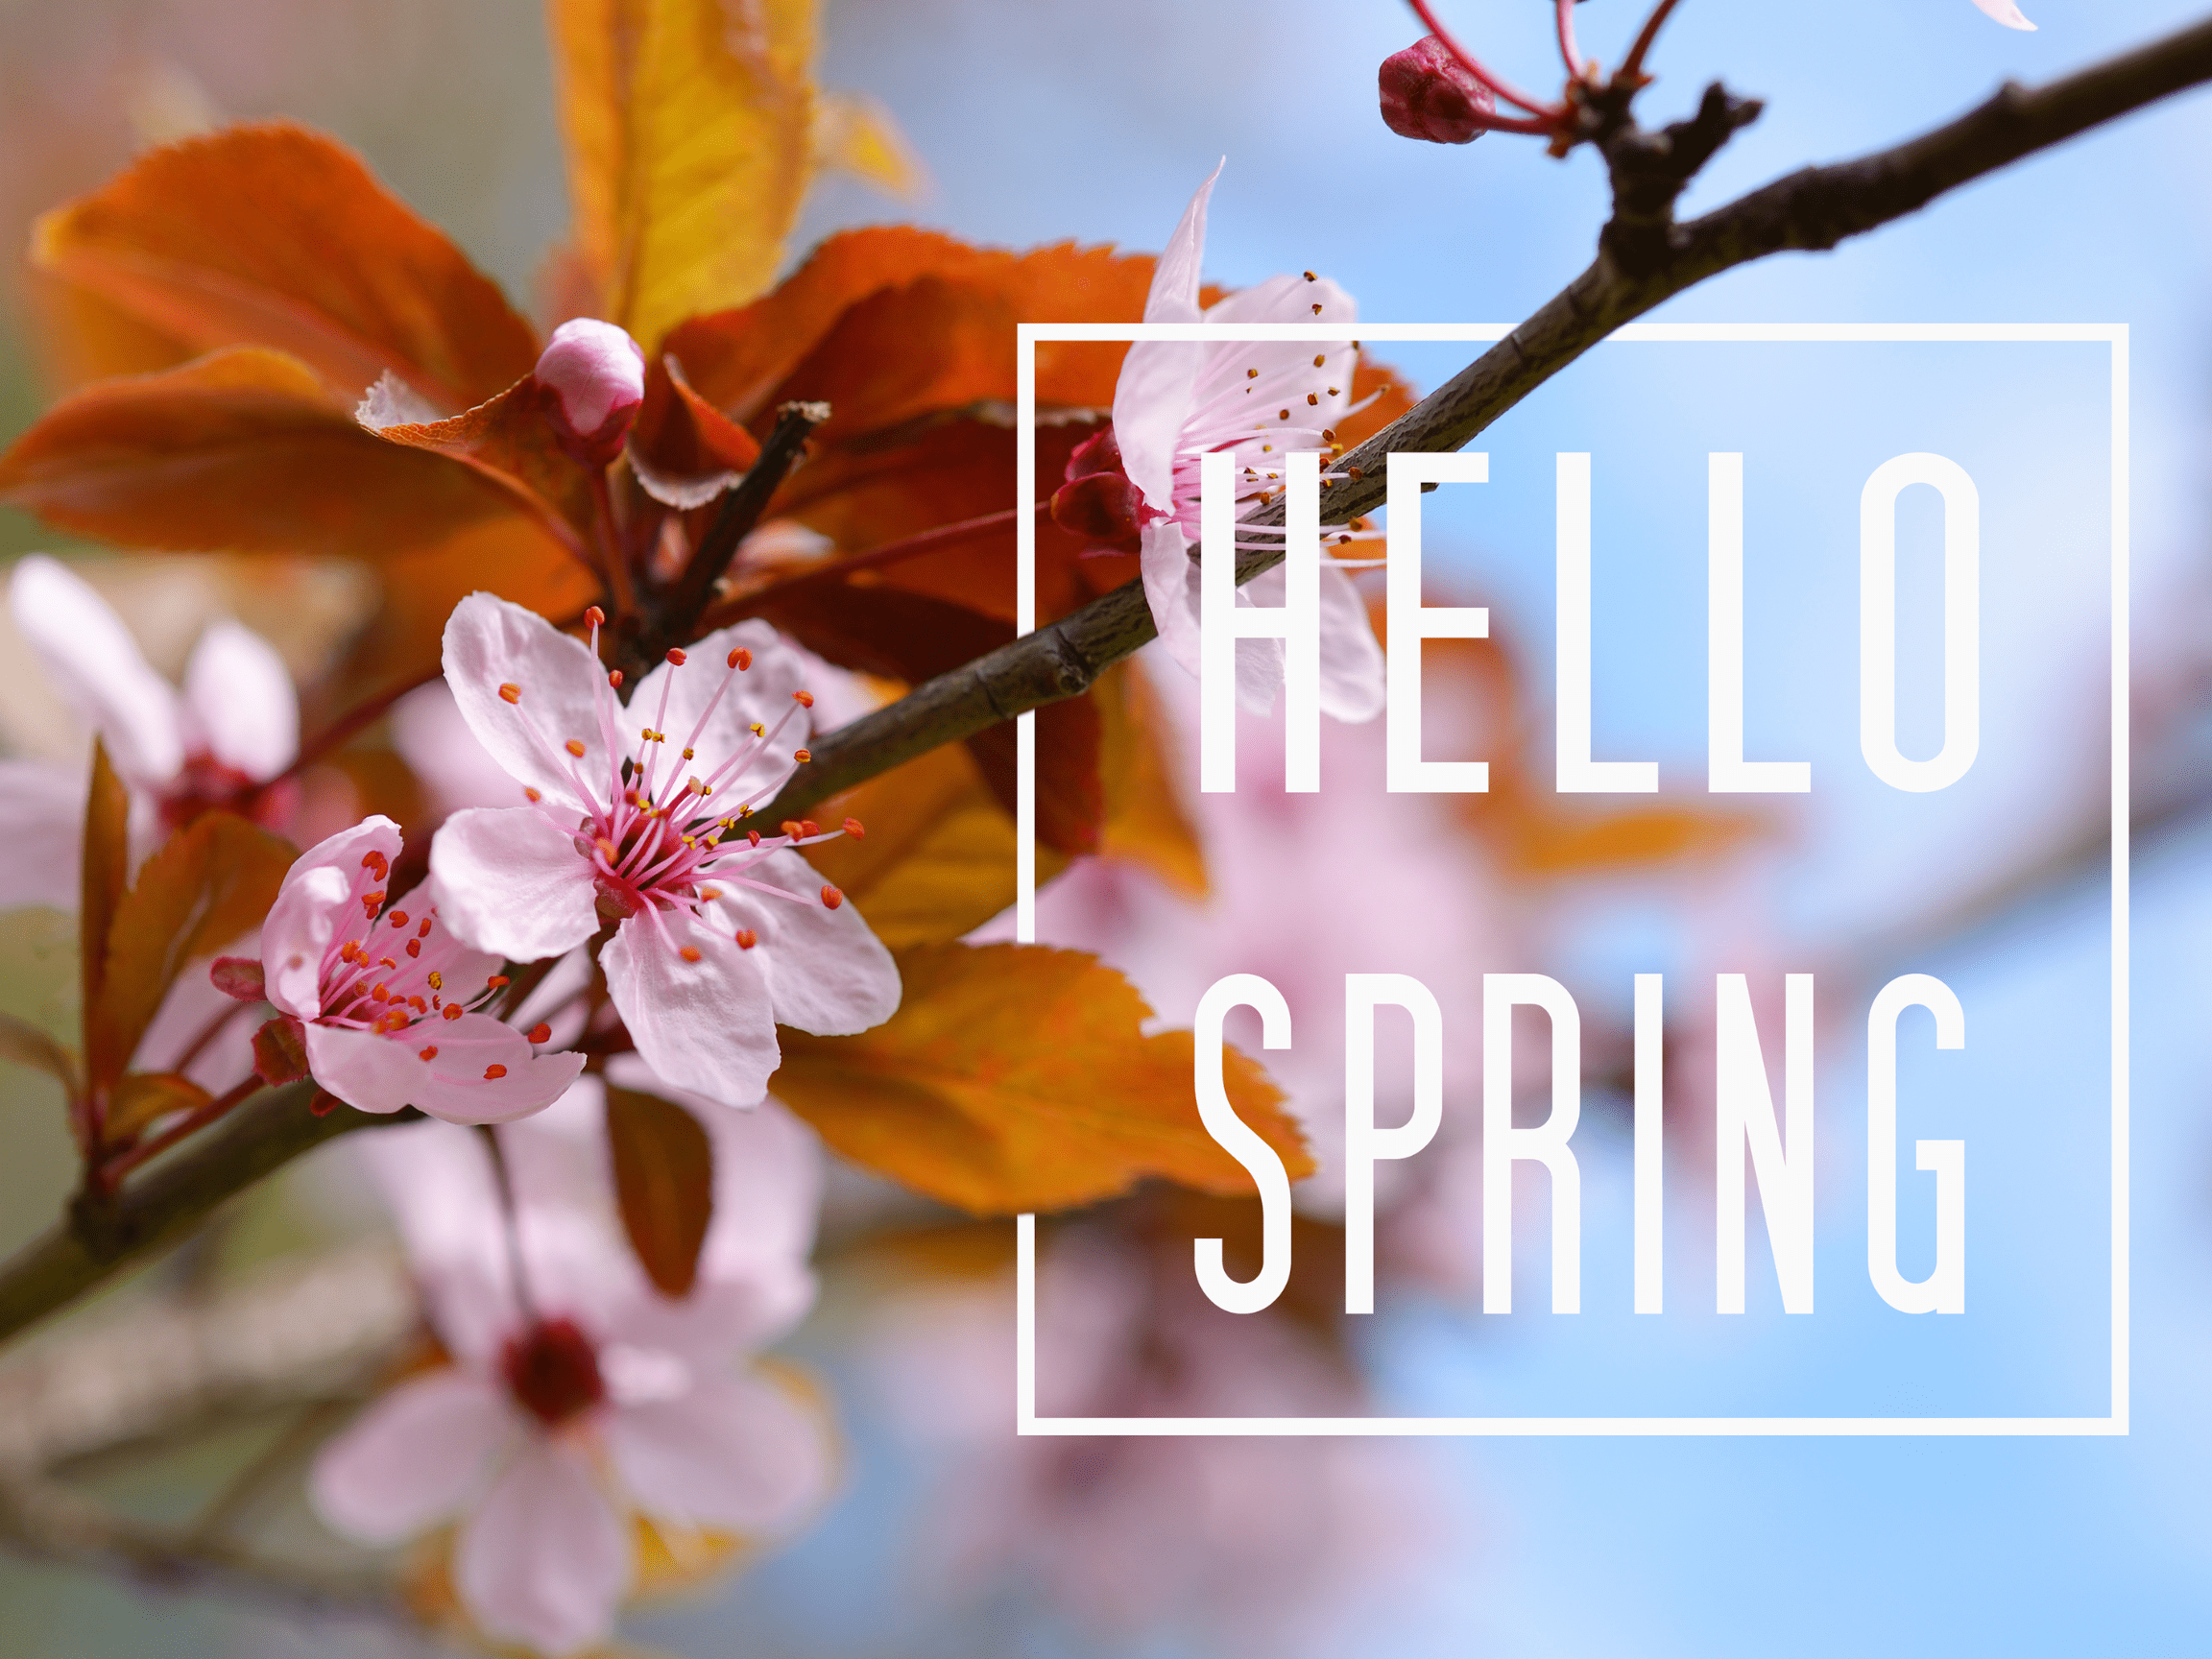 Why Spring is the Best Season: A Celebration of Renewal and Growth